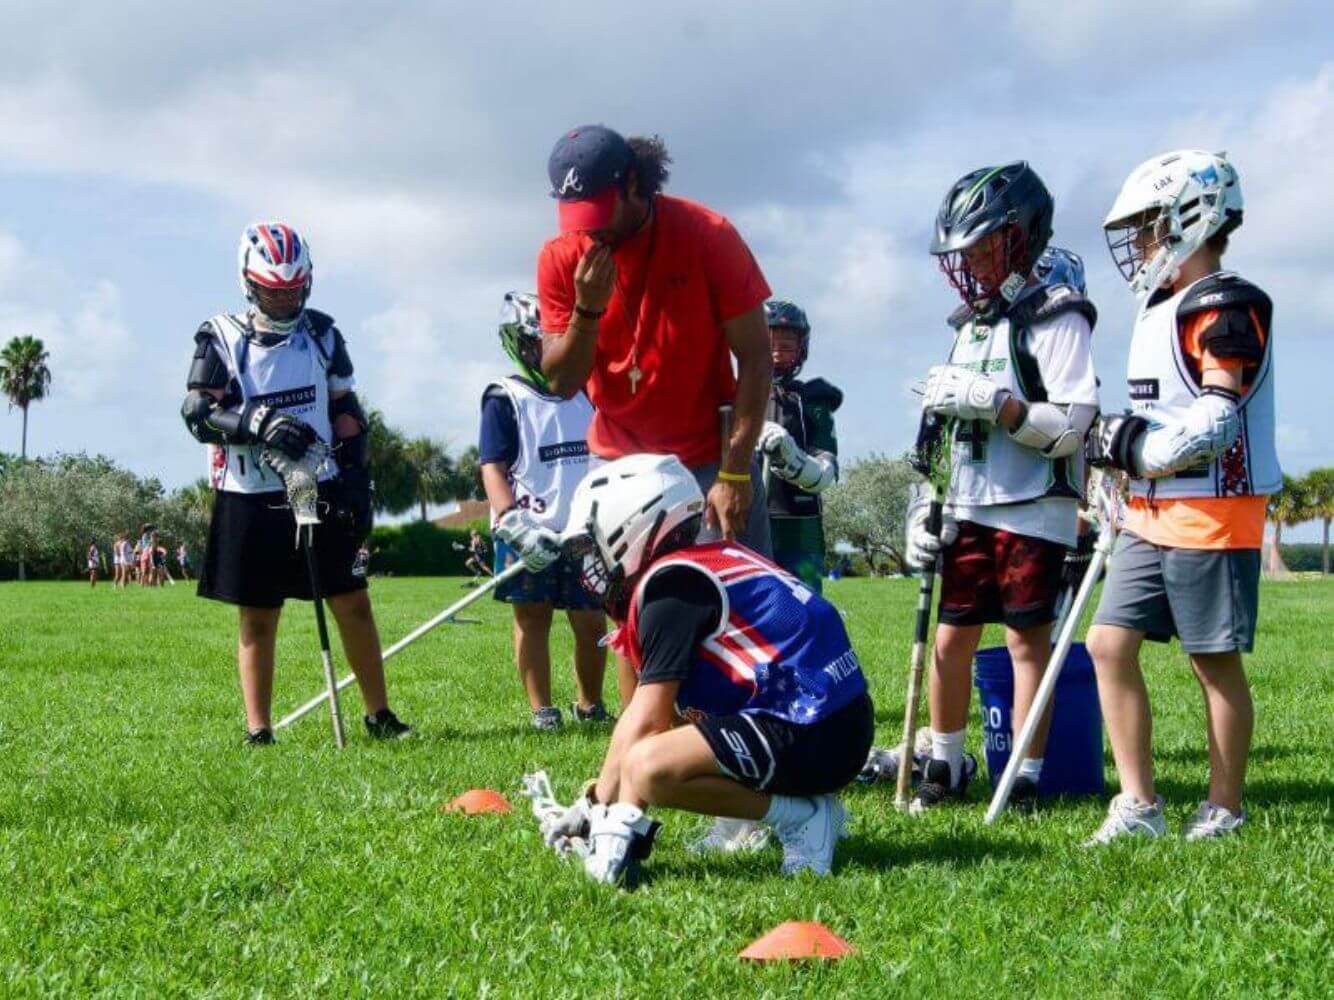 Lacrosse player practicing a face off drill during summer lacrosse camp